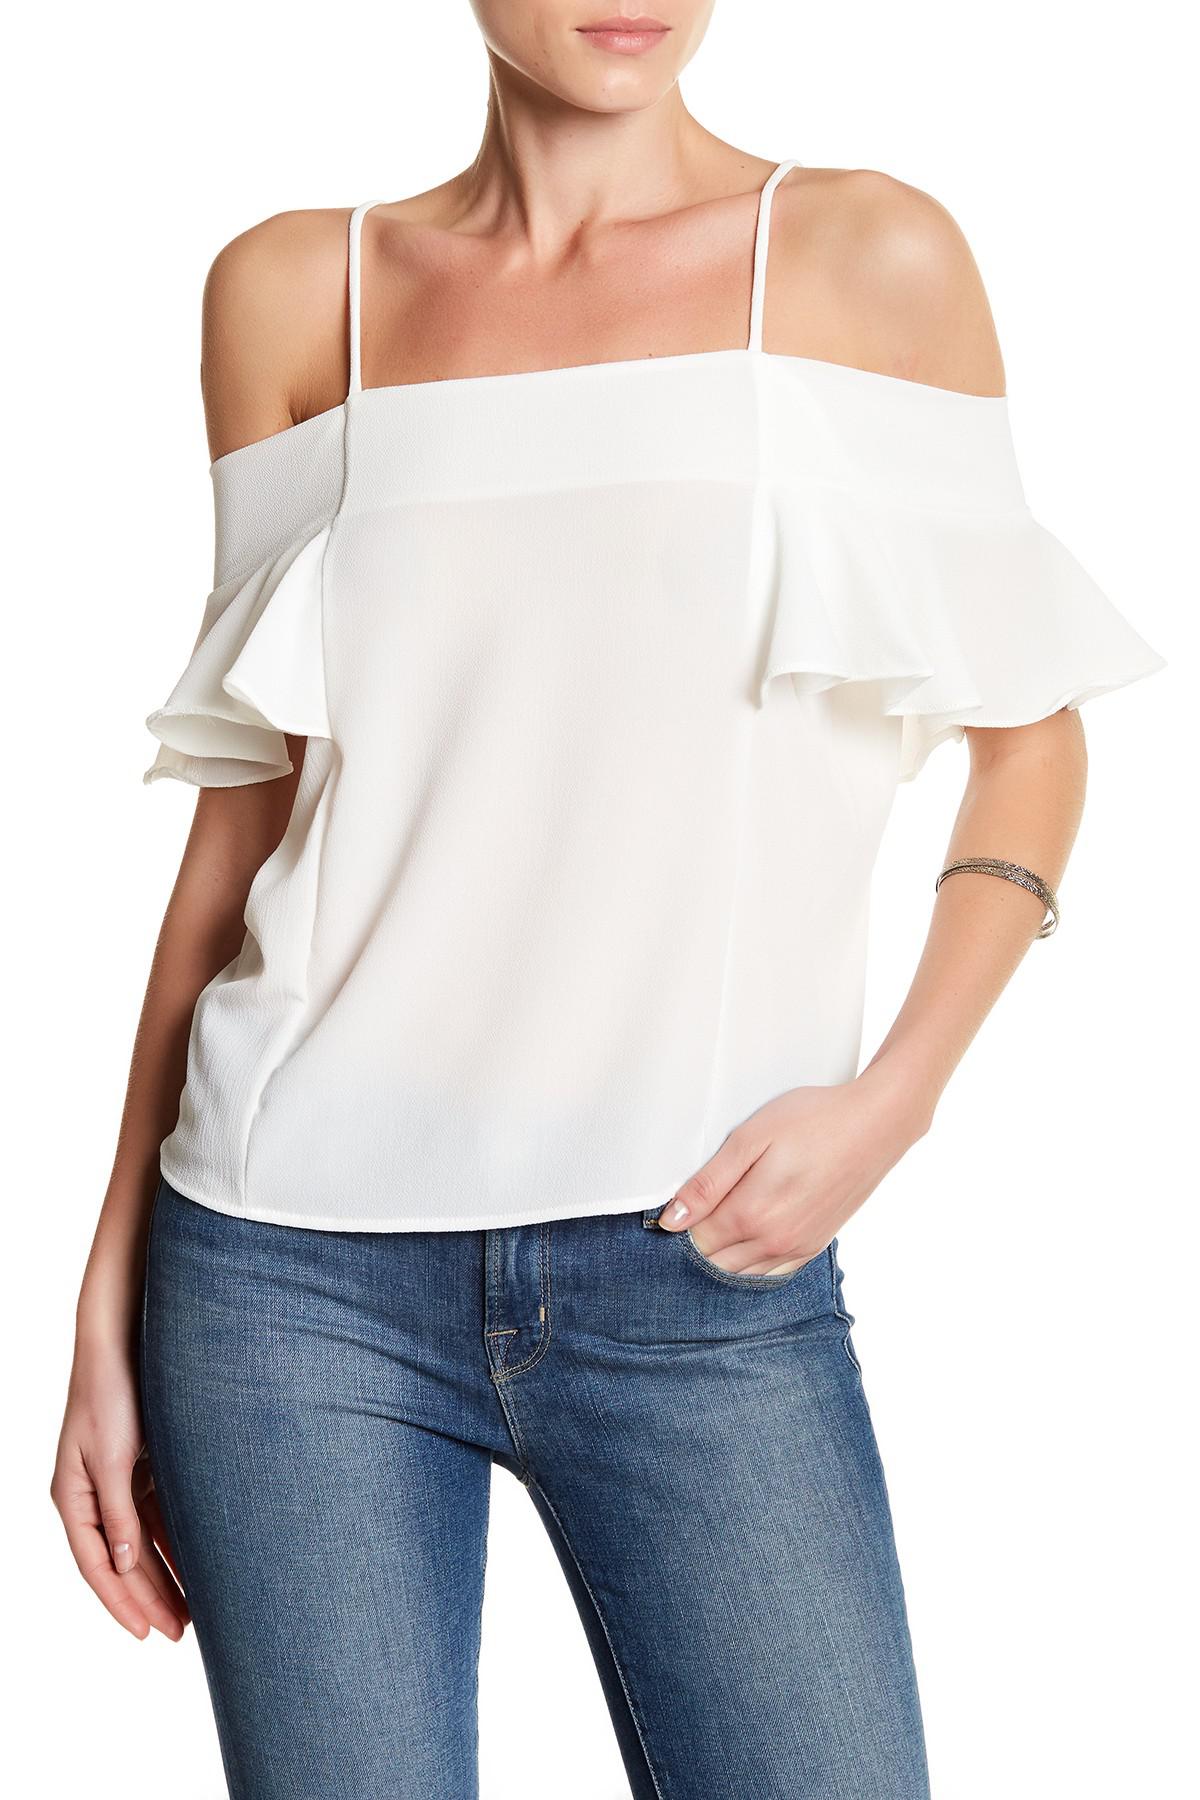 Lyst - West Kei Cold Shoulder Spaghetti Strap Shirt in White